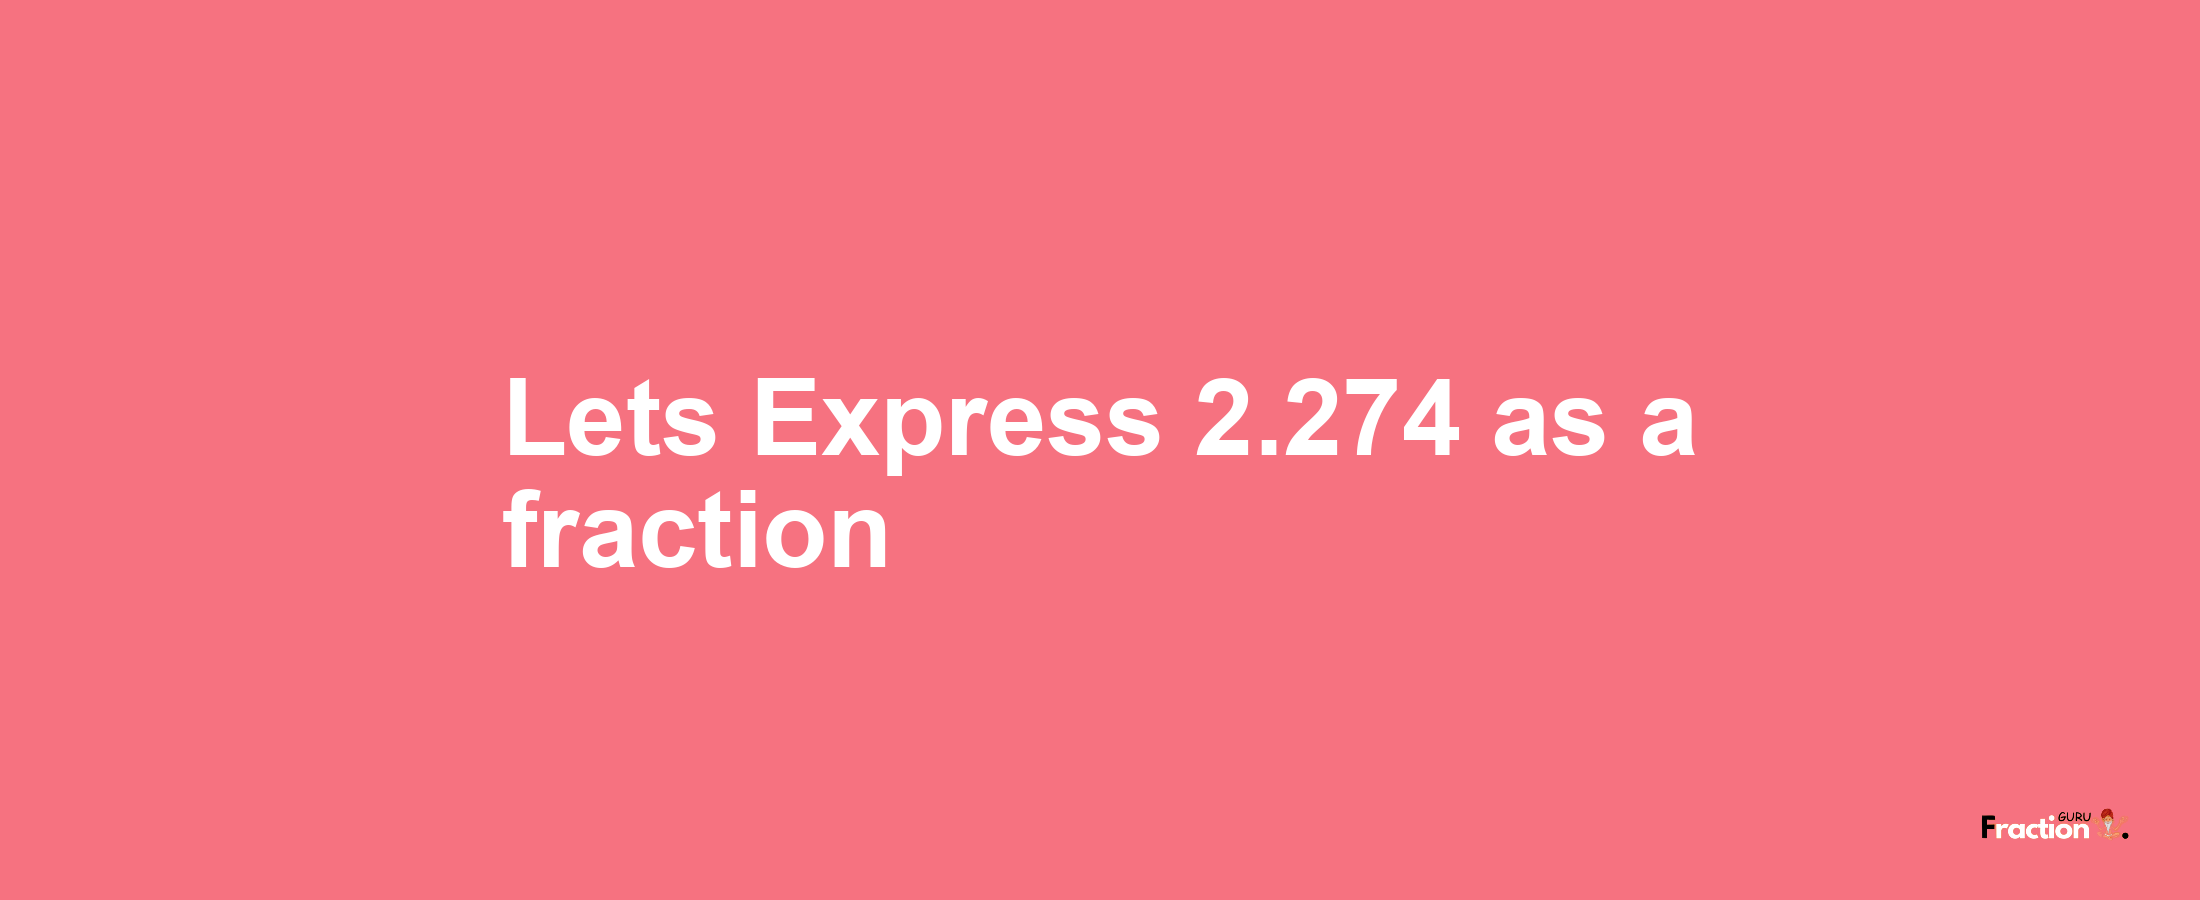 Lets Express 2.274 as afraction